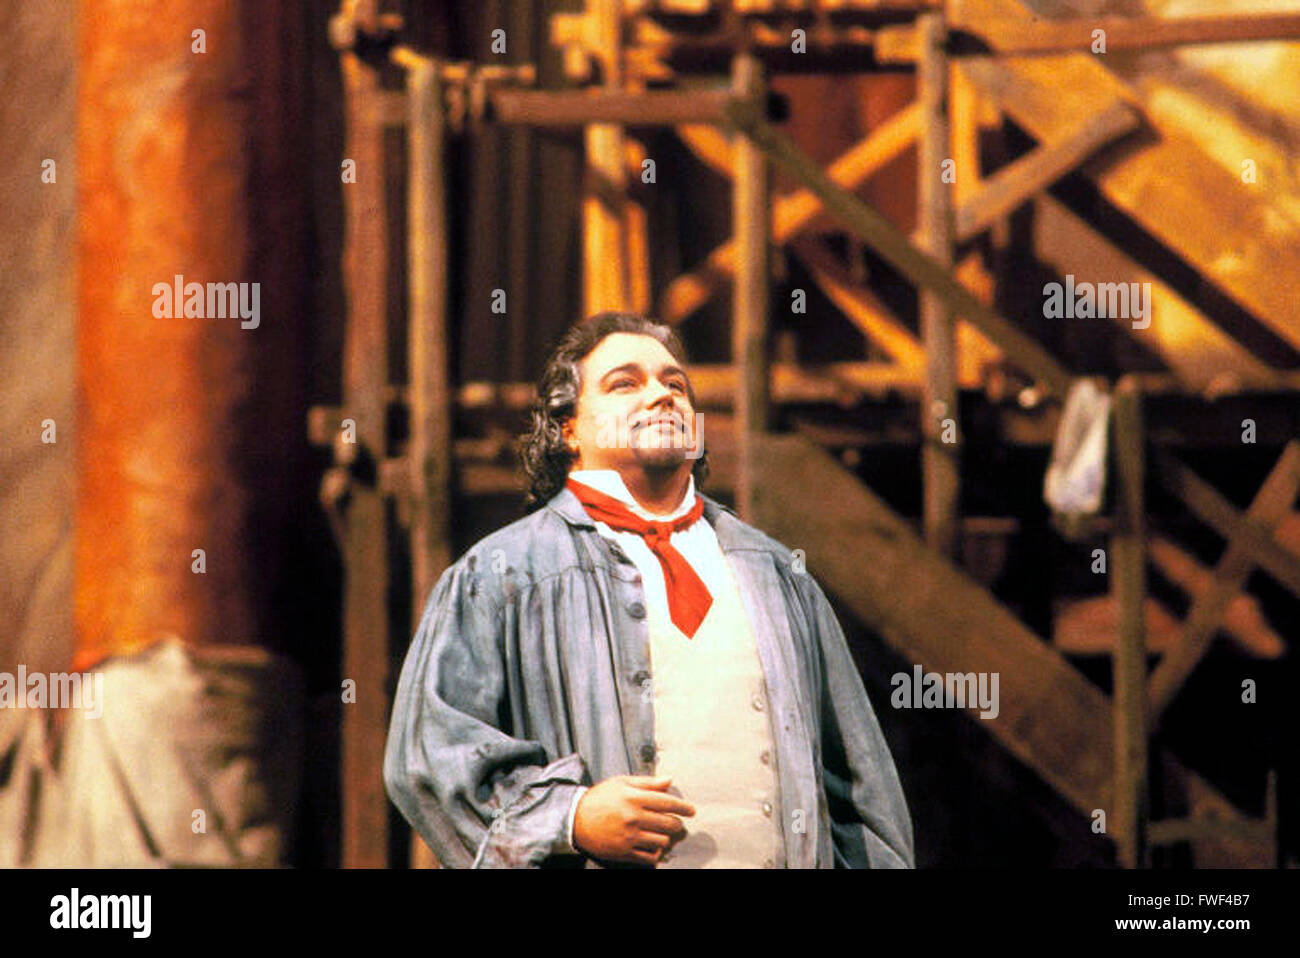 Salvatore Licitra, Italian tenor makes his Metropolitan Opera debut in Puccini's 'Tosca' replacing Luciano Pavarotti, Lincoln Center for the Performing Arts, New York City, USA, 12 May 2002. Stock Photo